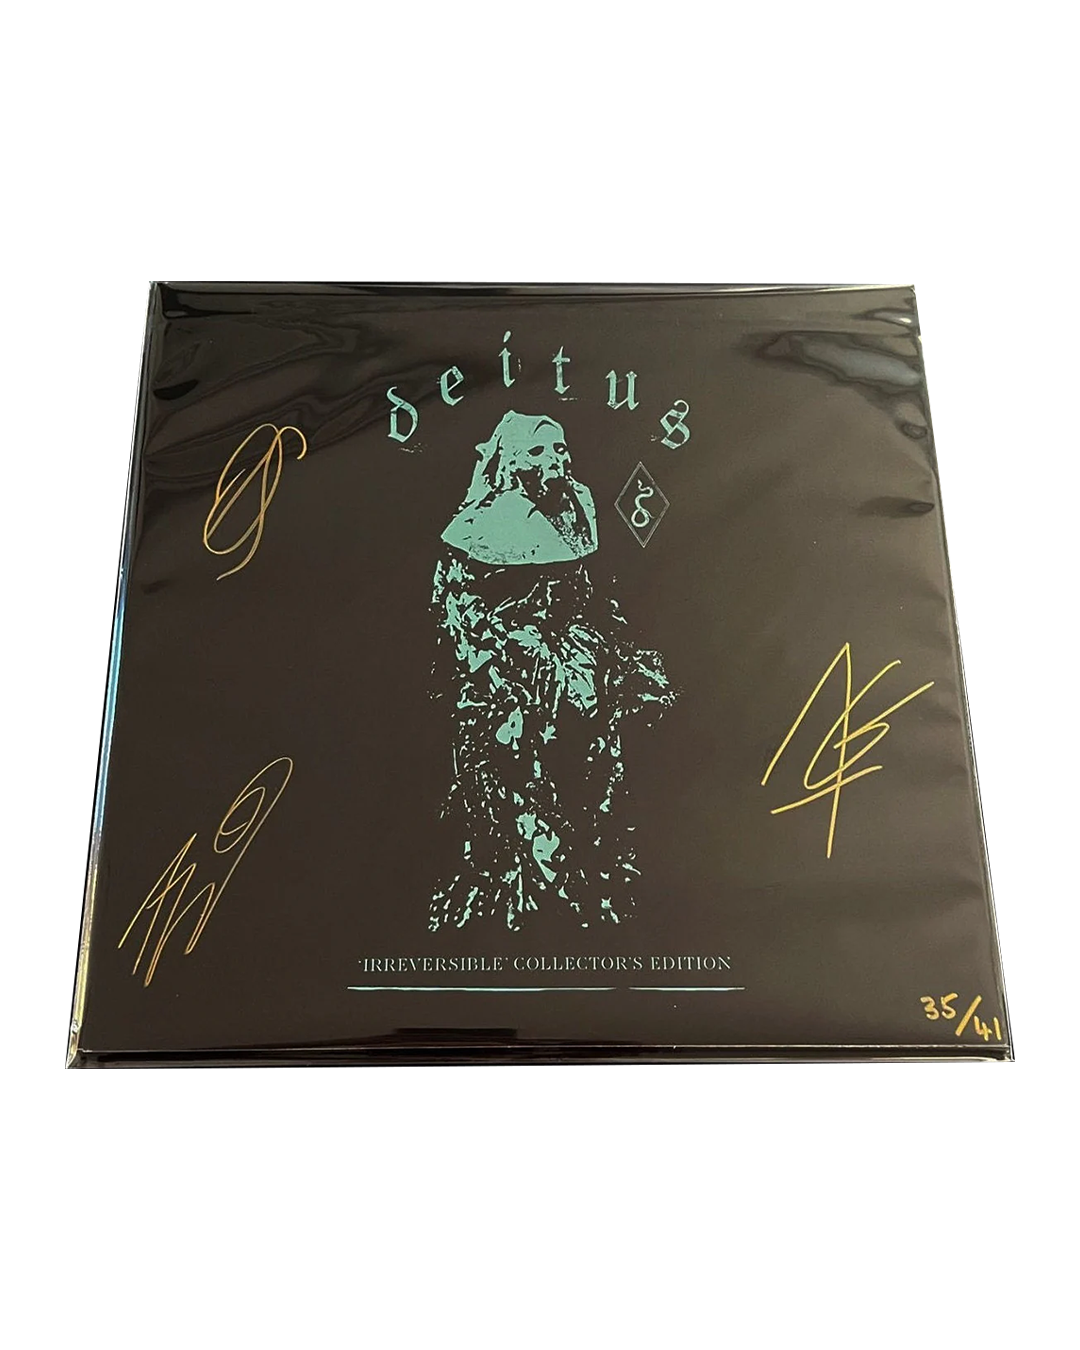 IRREVERSIBLE LTD. ED COLLECTORS VINYL LP - HAND SIGNED BY THE BAND